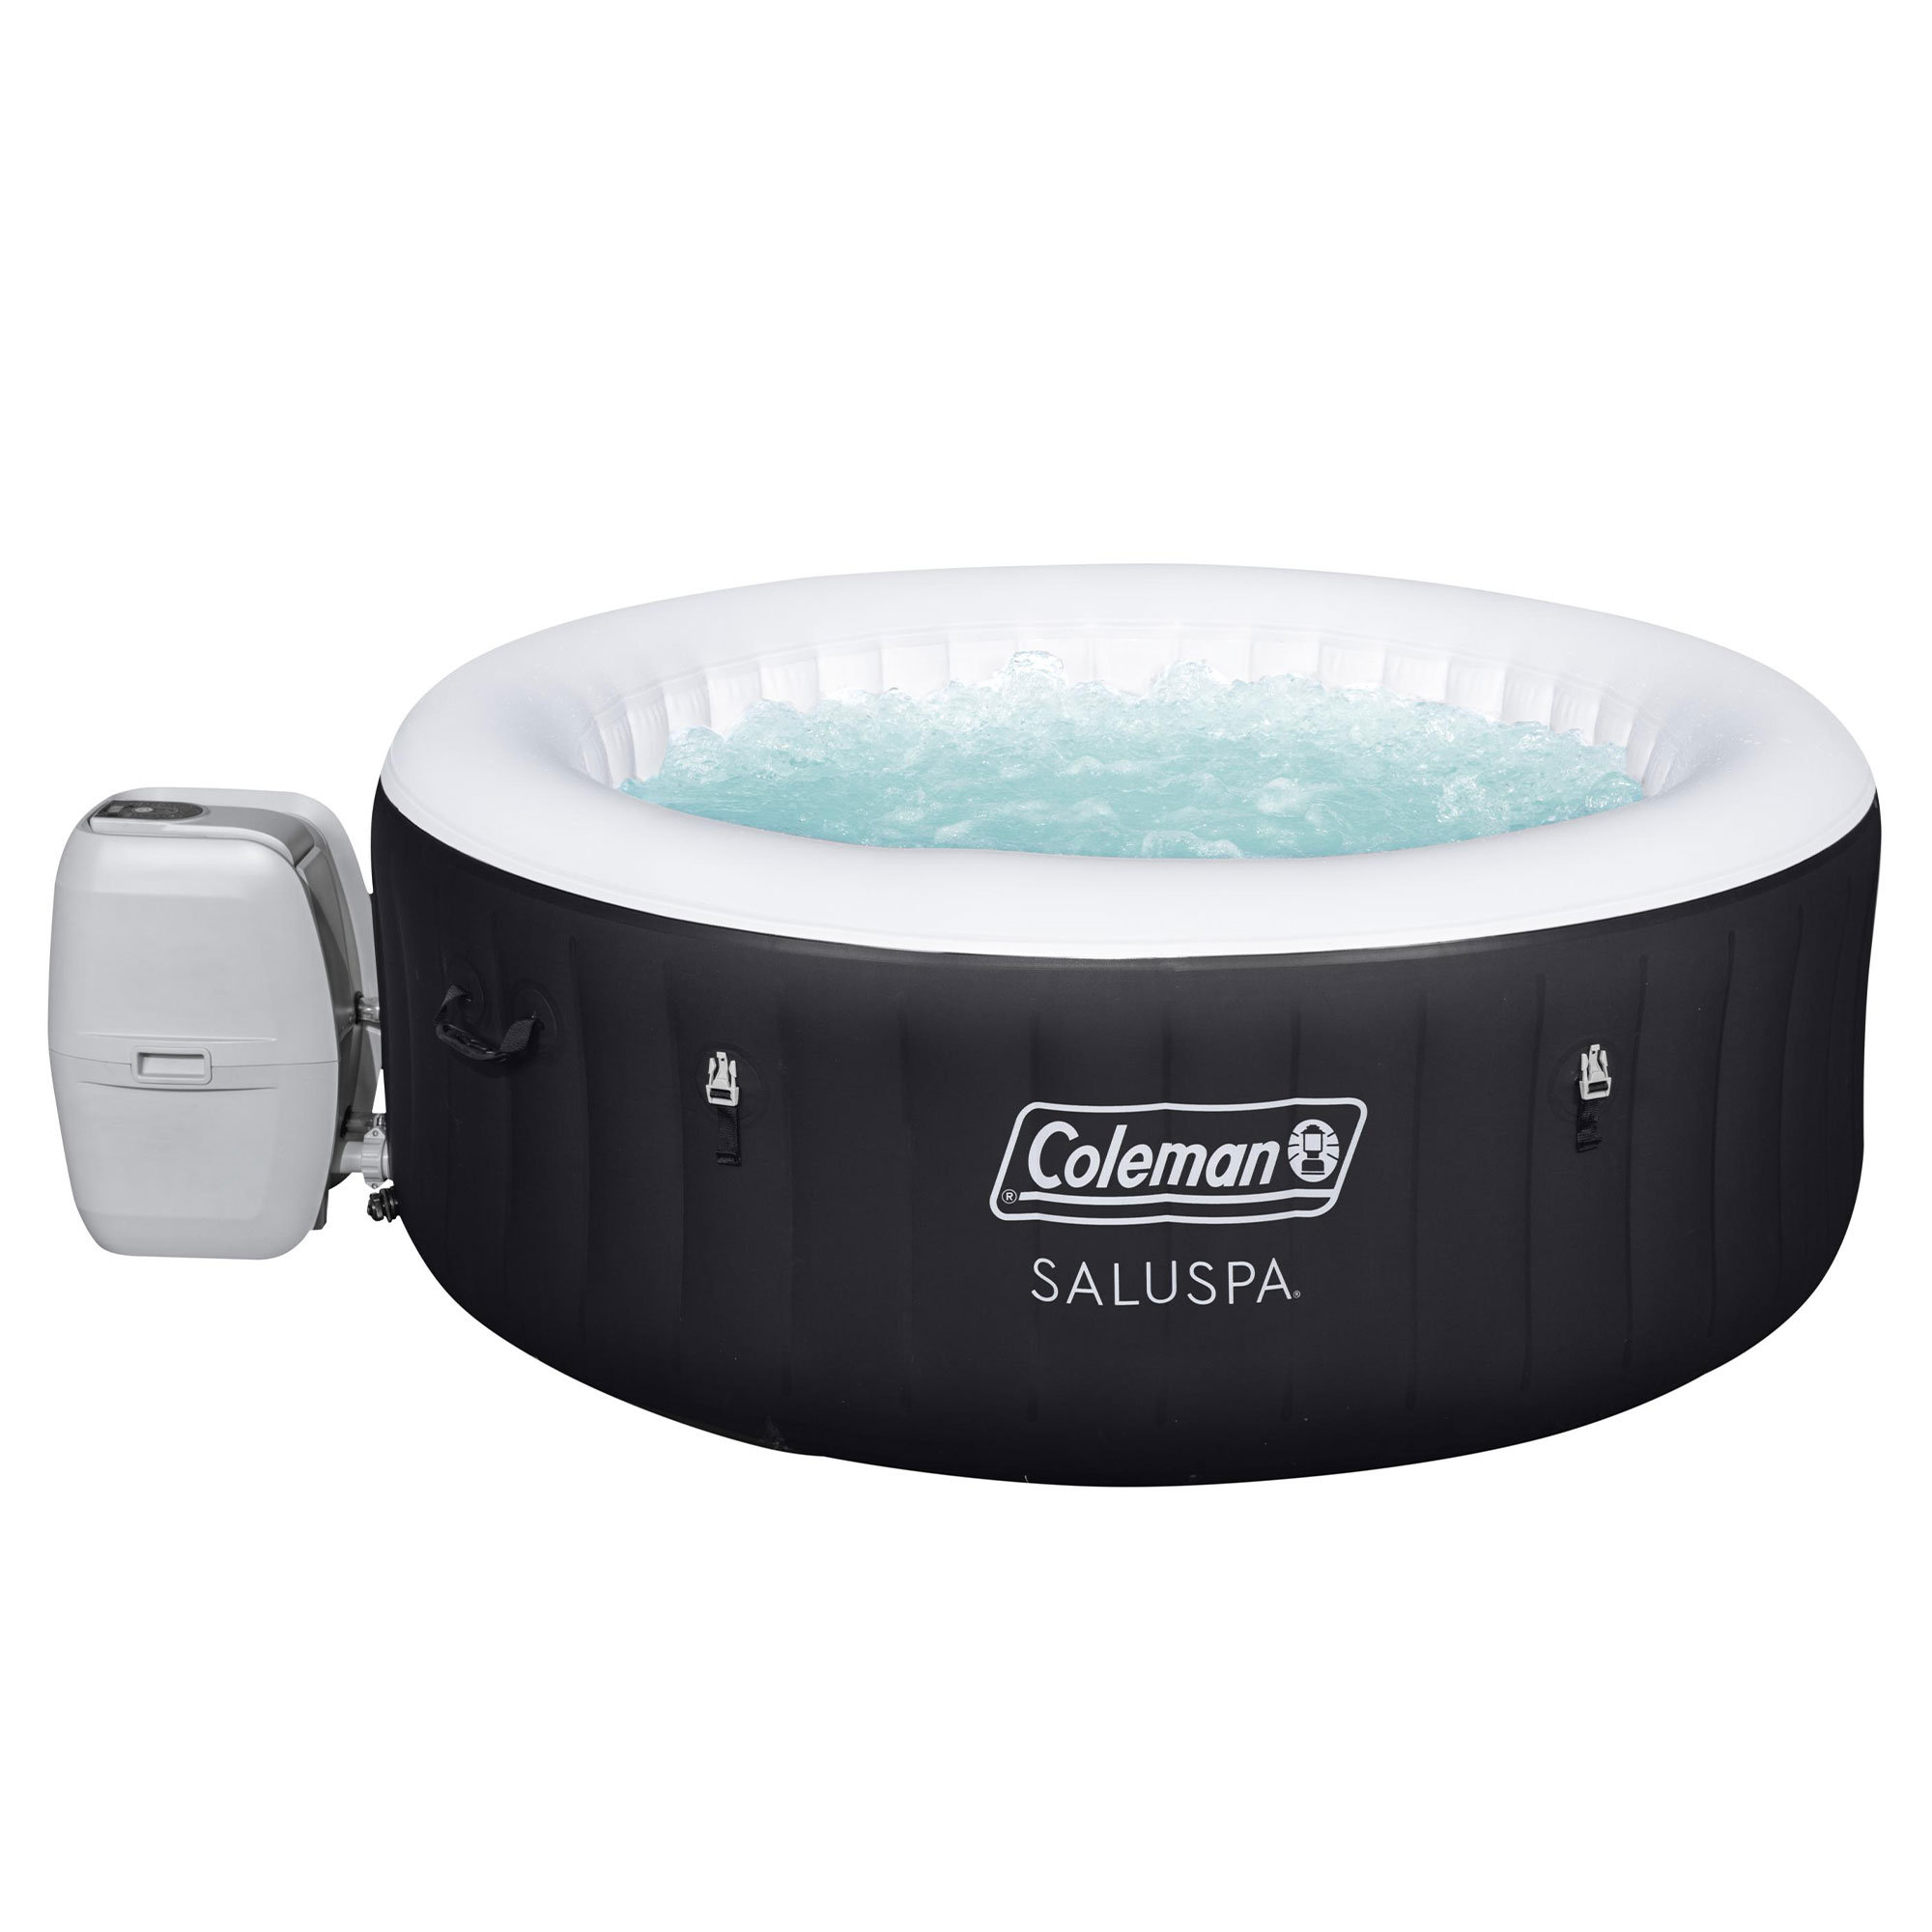 Coleman Saluspa Miami Air Jet 4 Person Inflatable Hot Tub Spa With Pump And Reviews Wayfair